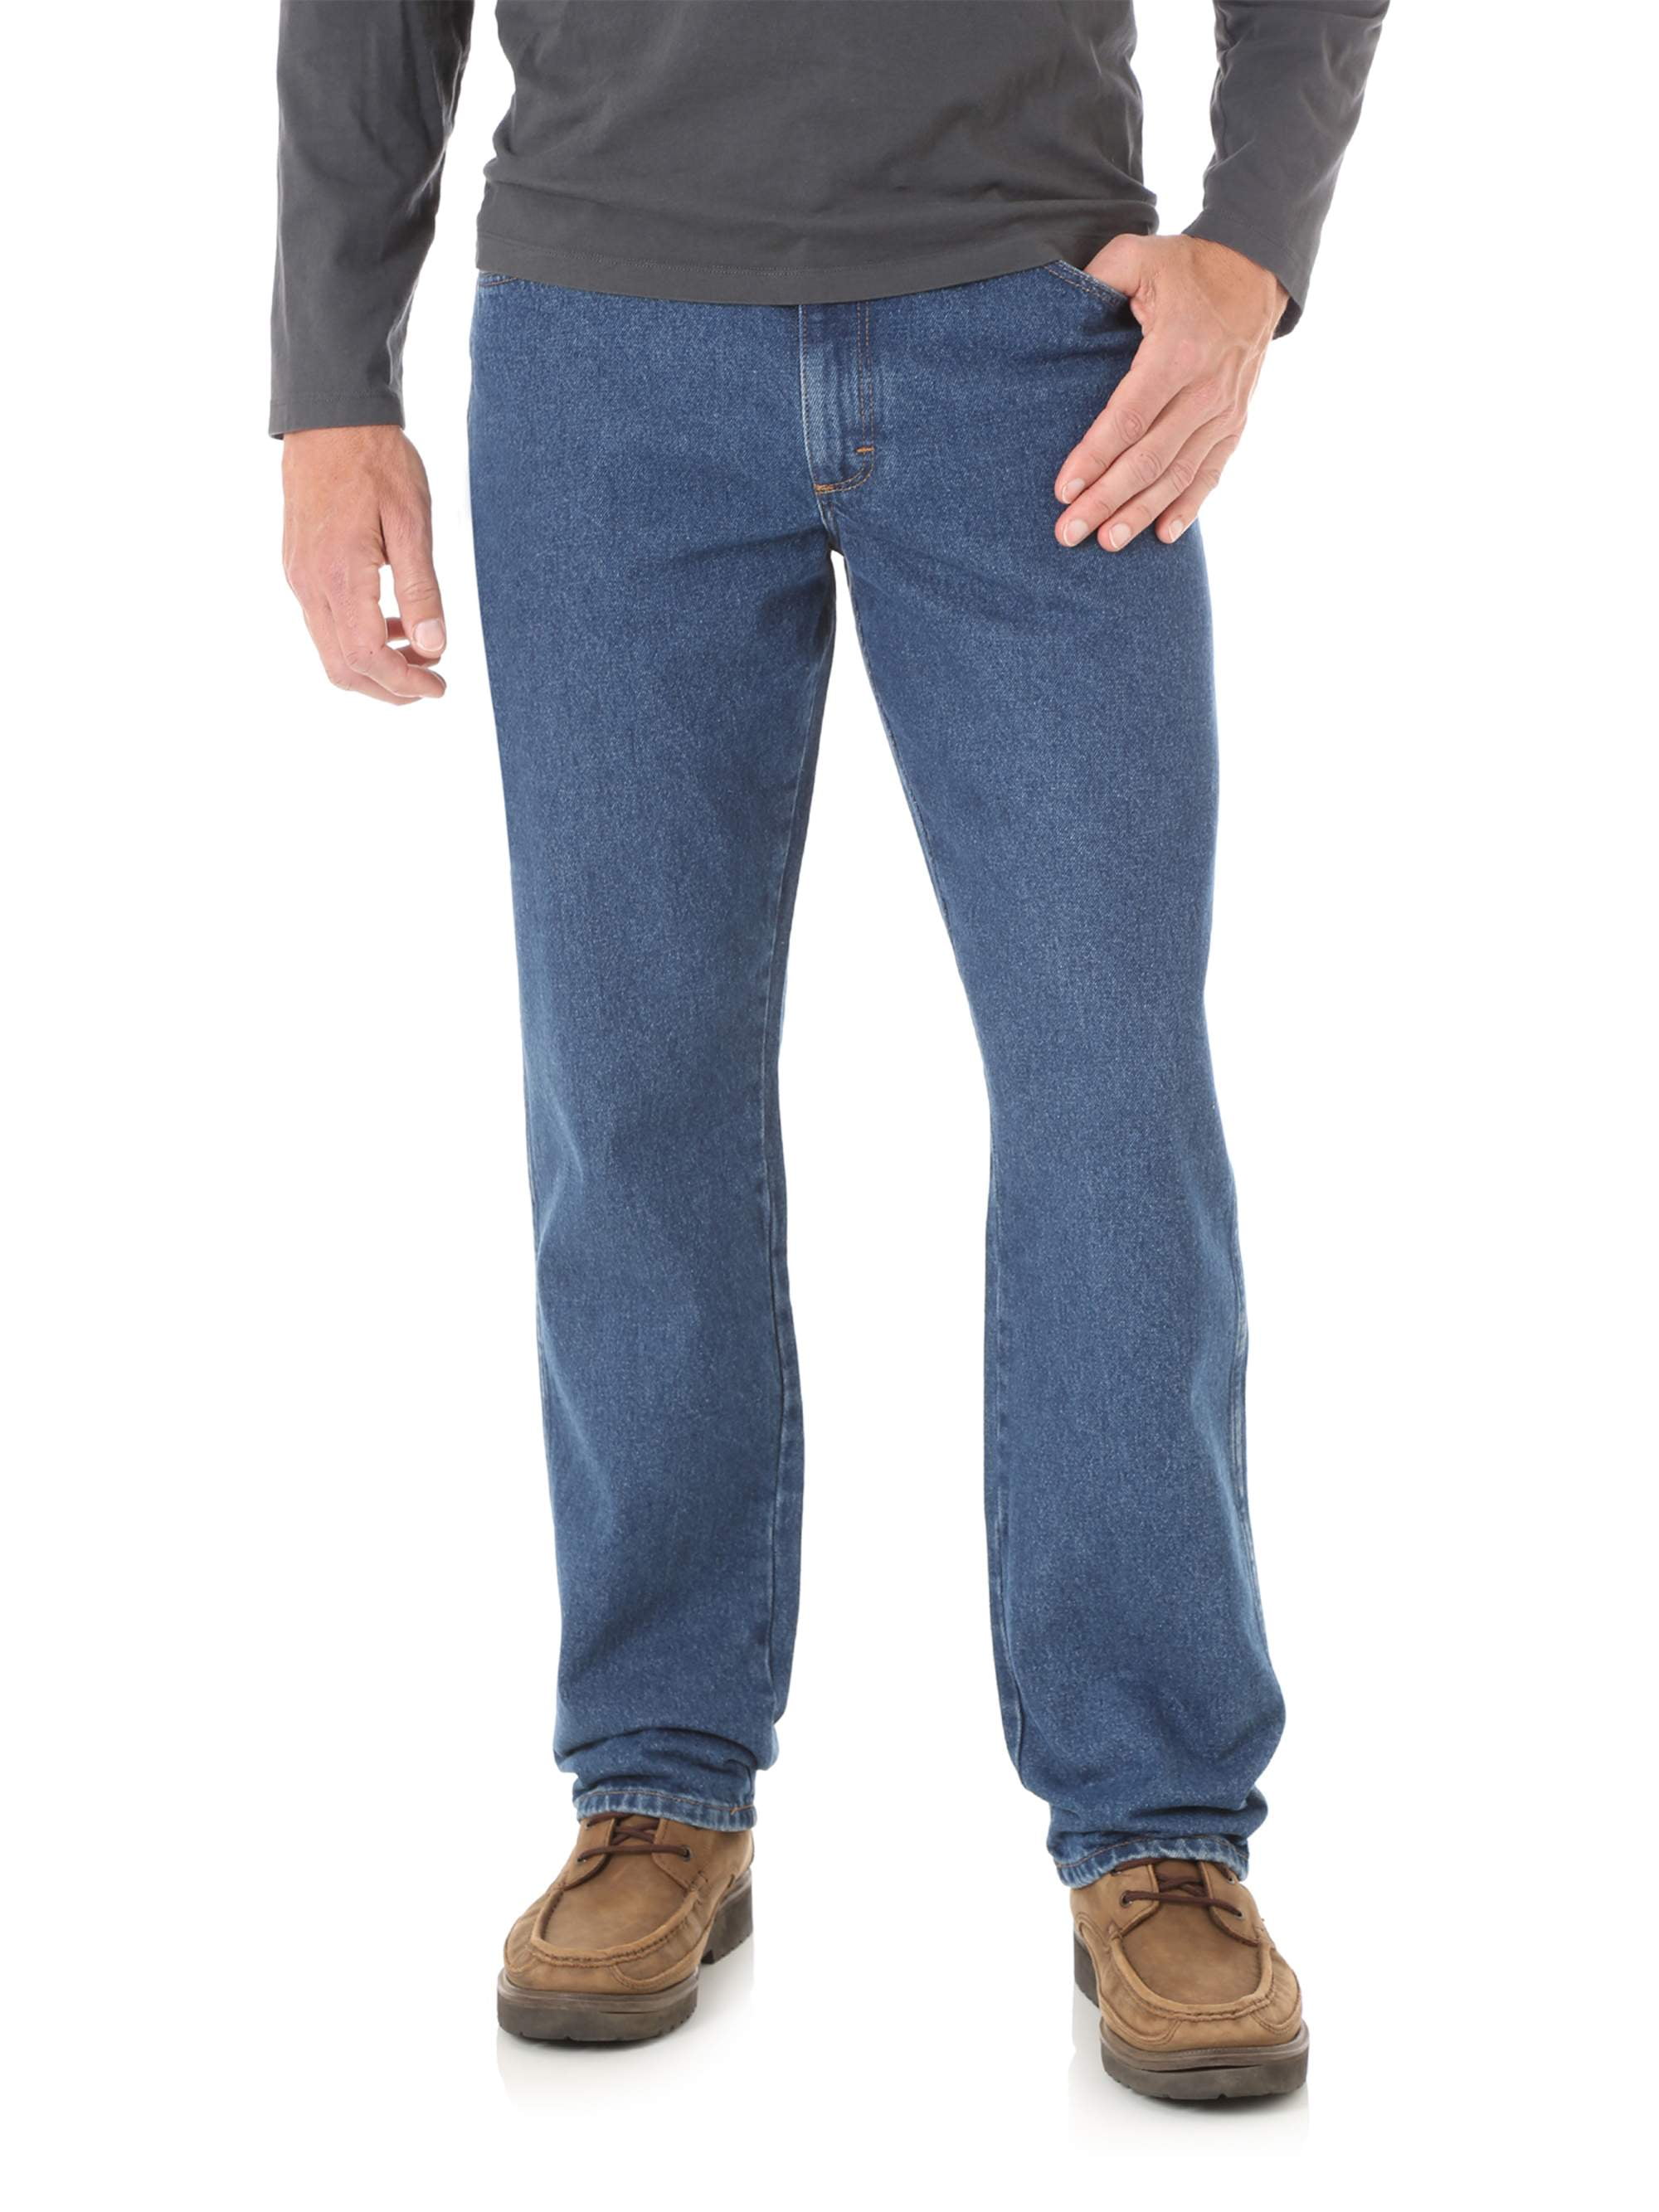 Rustler and Big Men's Relaxed Fit Jeans - Walmart.com